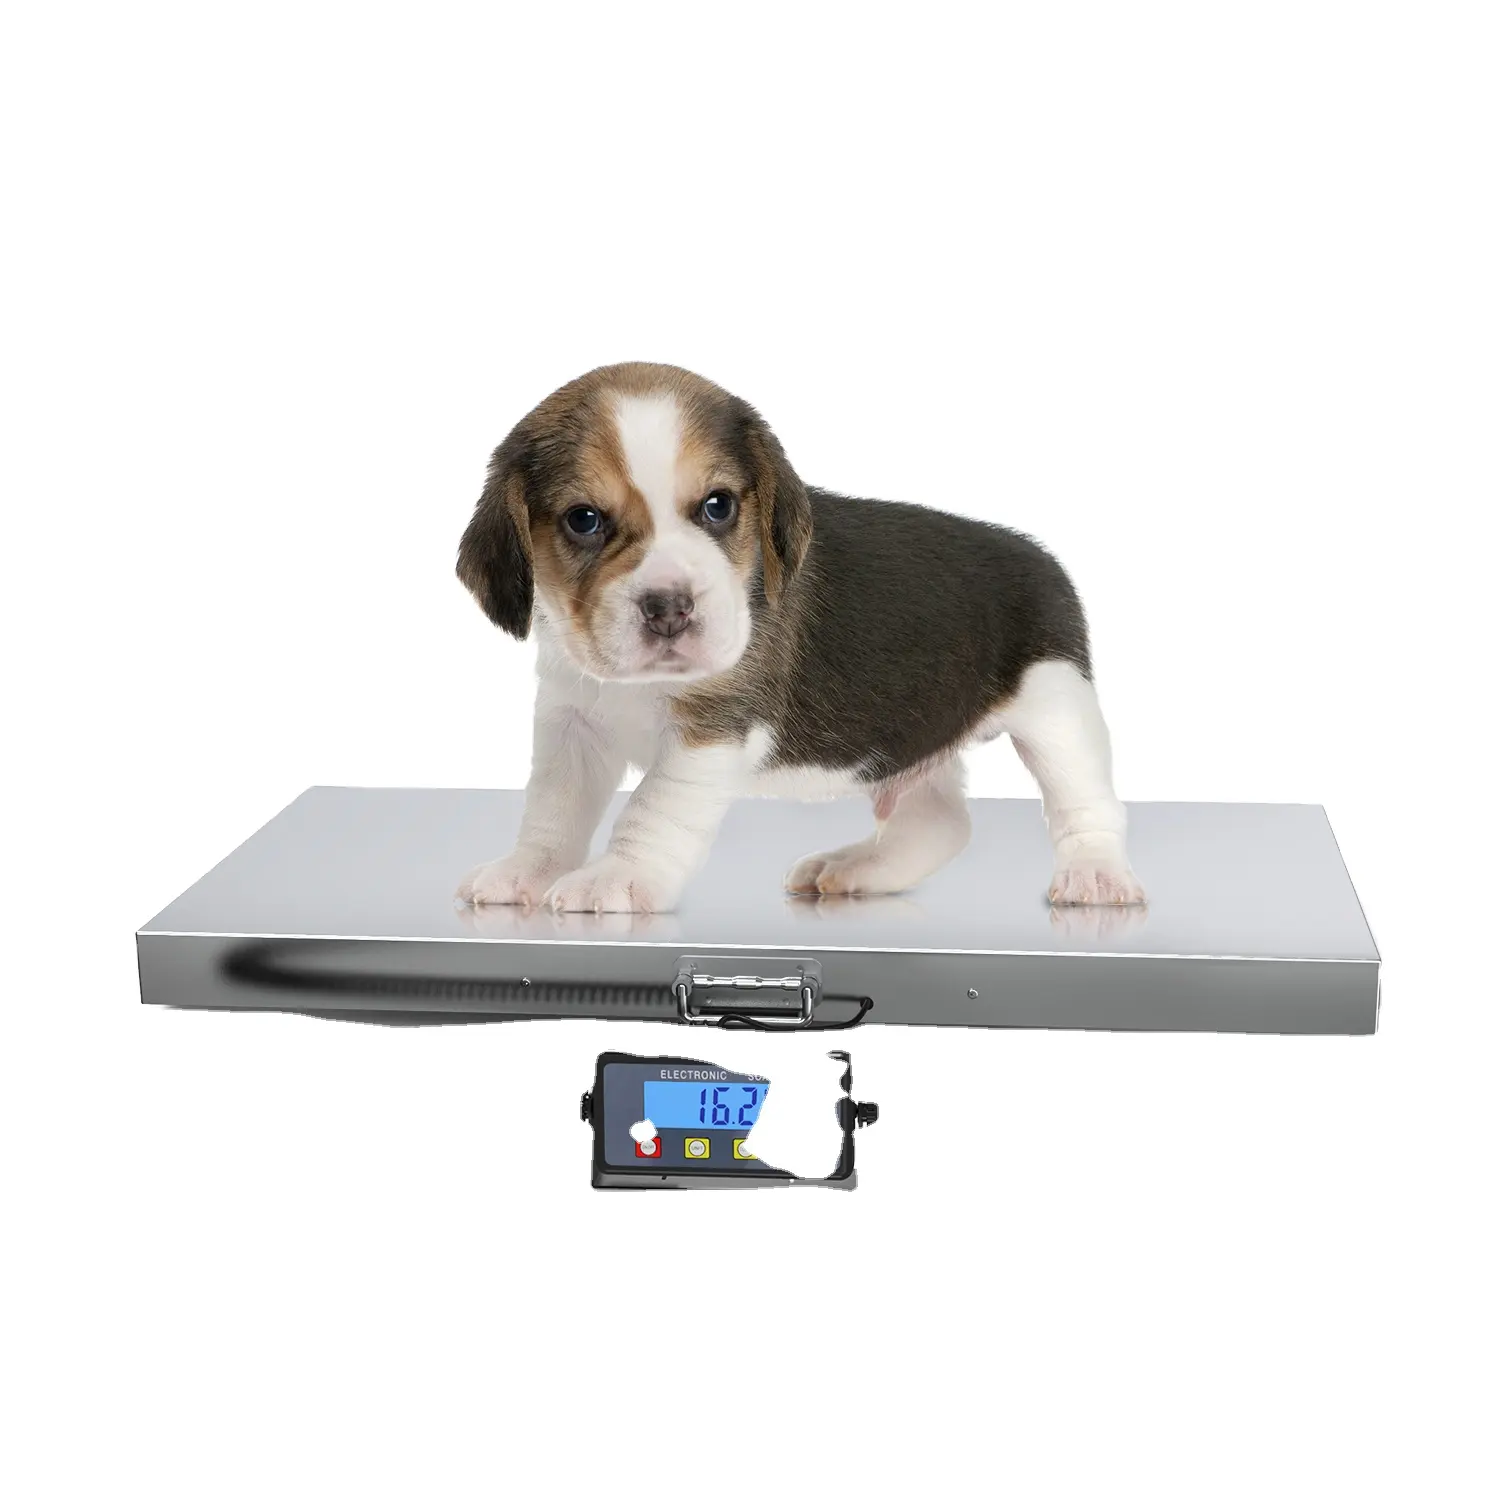 SF-809A 1100lbs Heavy Duty Digital Platform Scale with Power Adapter for Vet Animal Pet Cat Dog Cattle